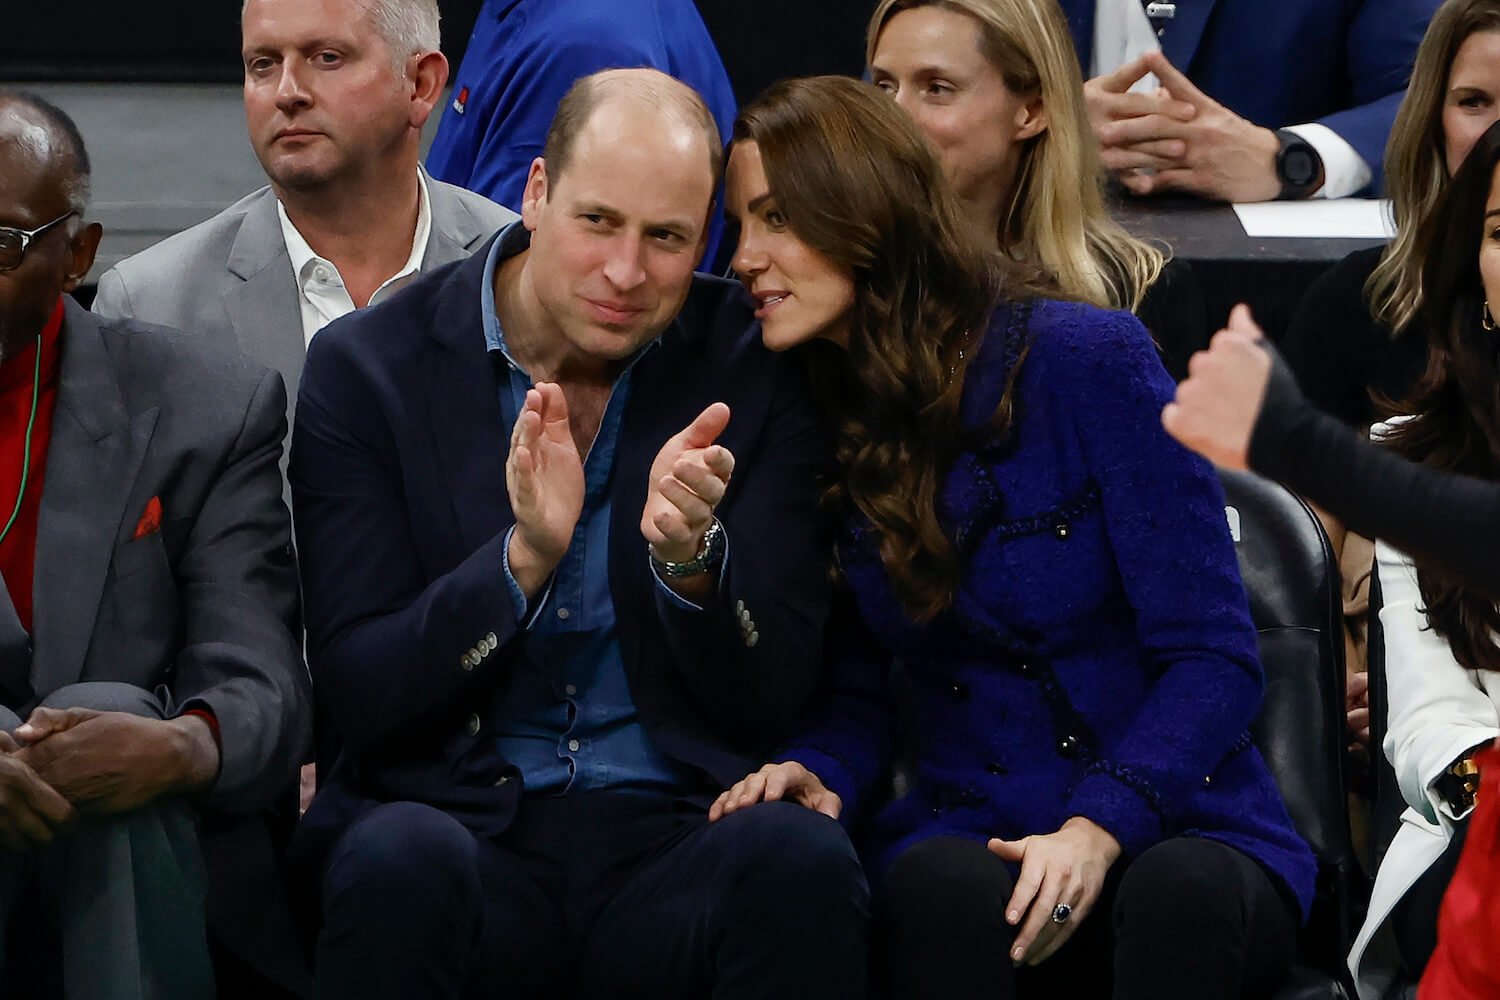 Kate Middleton touches Prince William's thigh and leans to talk to him during Boston Celtics basketball game